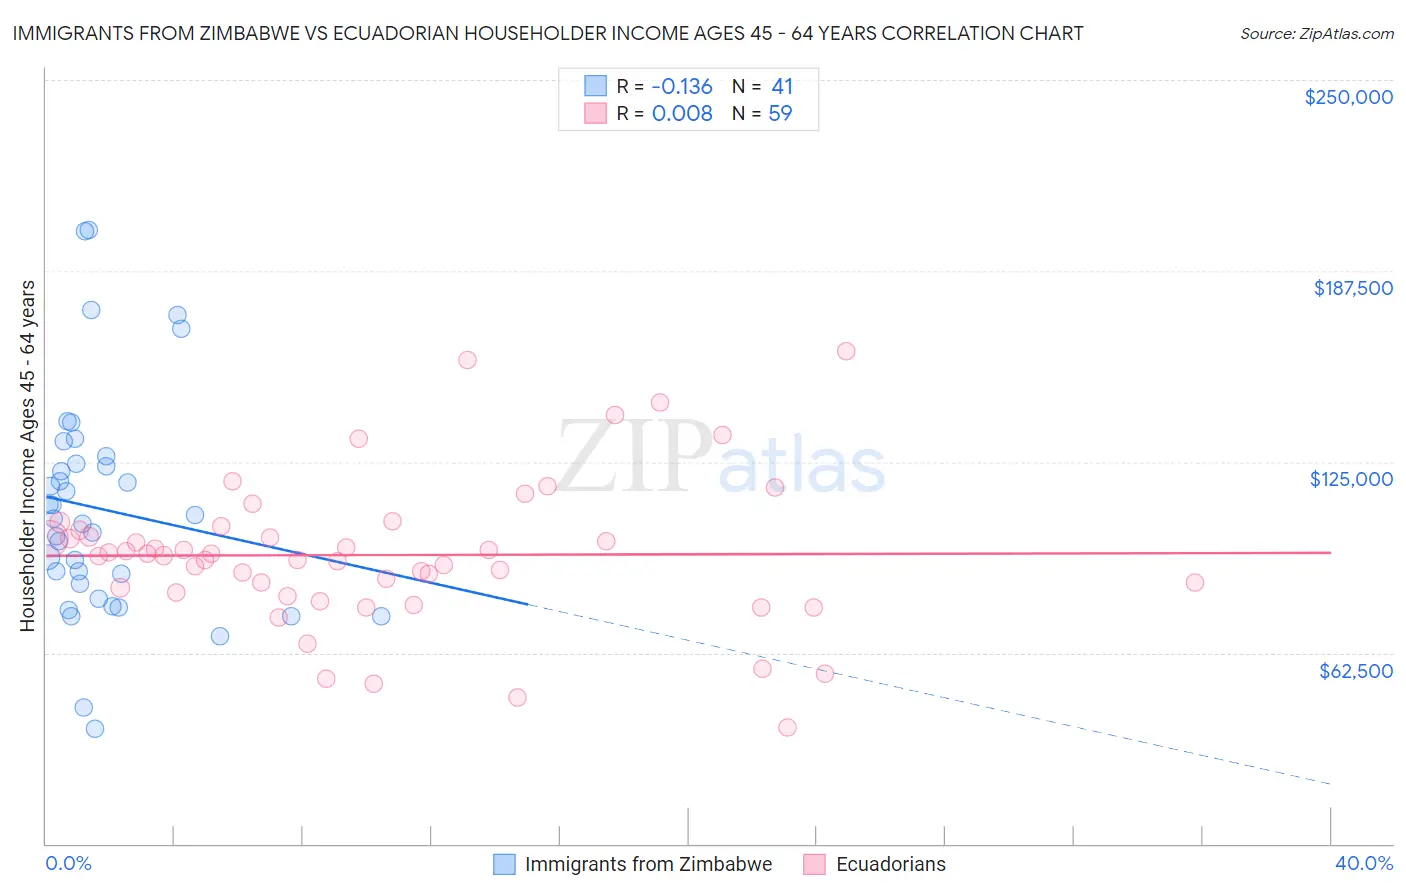 Immigrants from Zimbabwe vs Ecuadorian Householder Income Ages 45 - 64 years